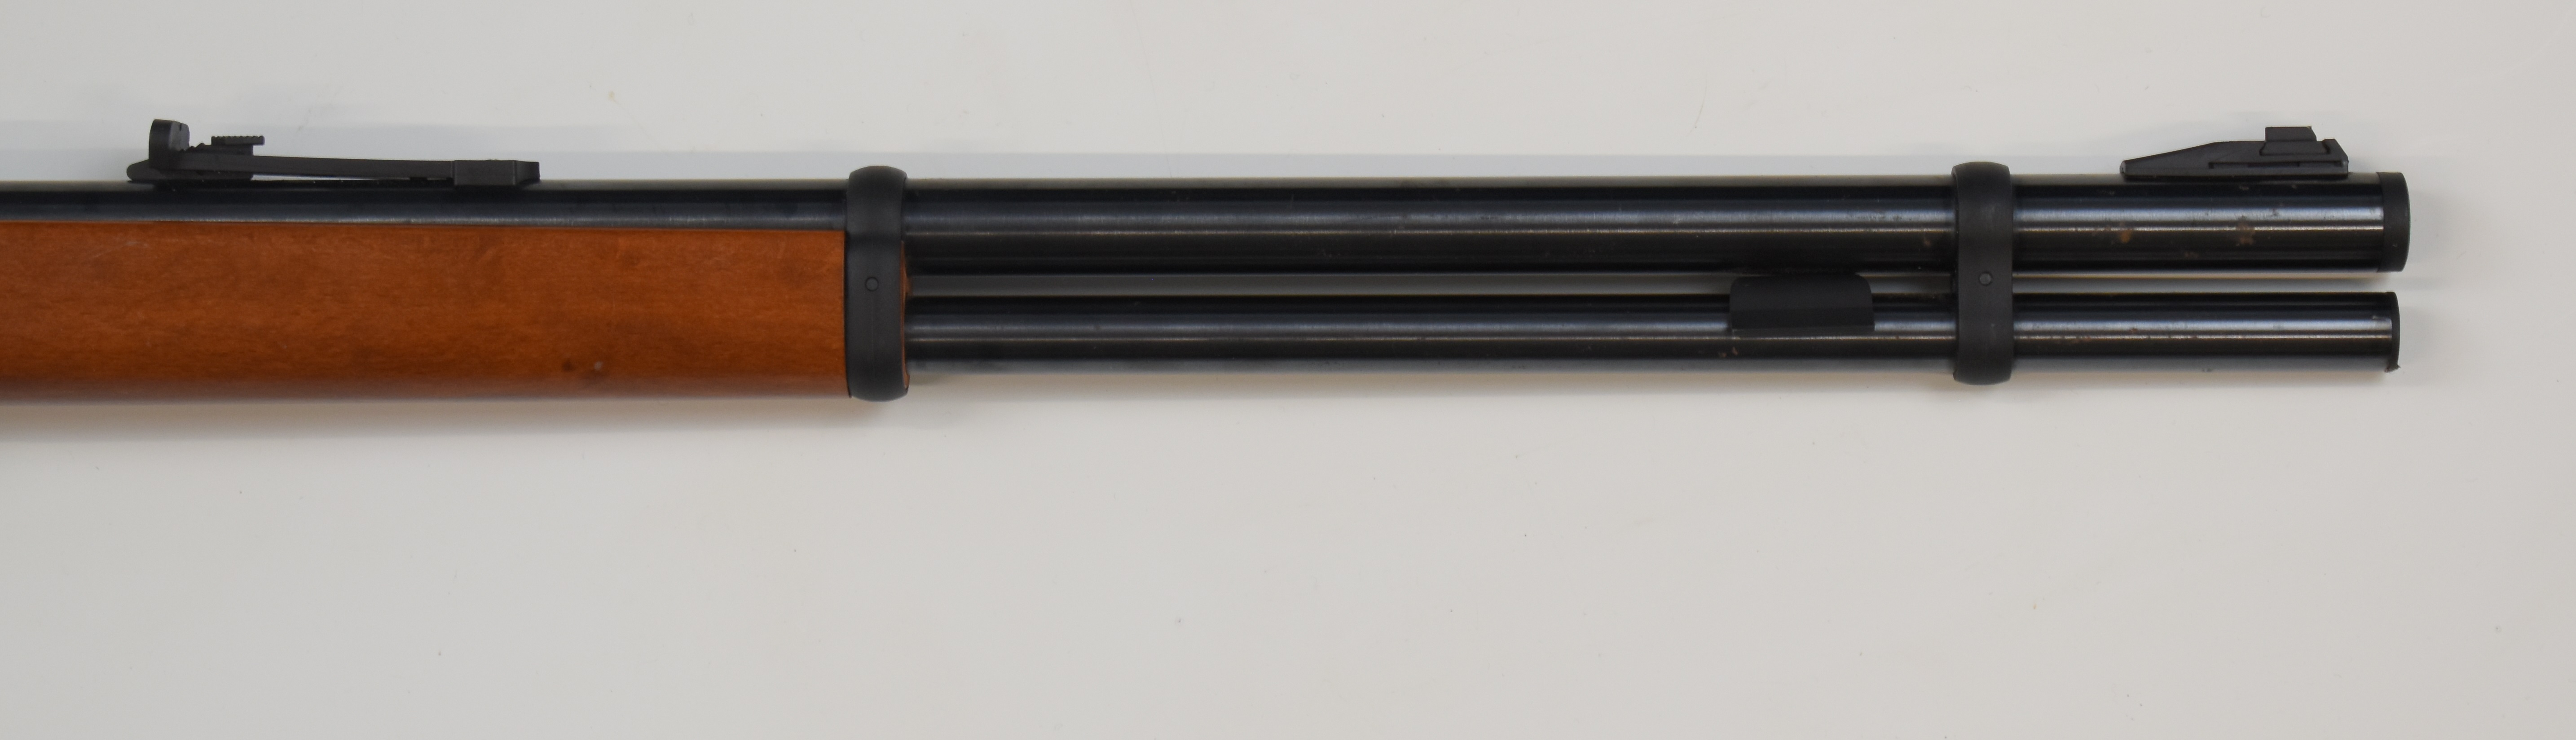 Walther Winchester style lever-action .177 CO2 carbine air rifle with two 8 shot magazines, - Image 5 of 11